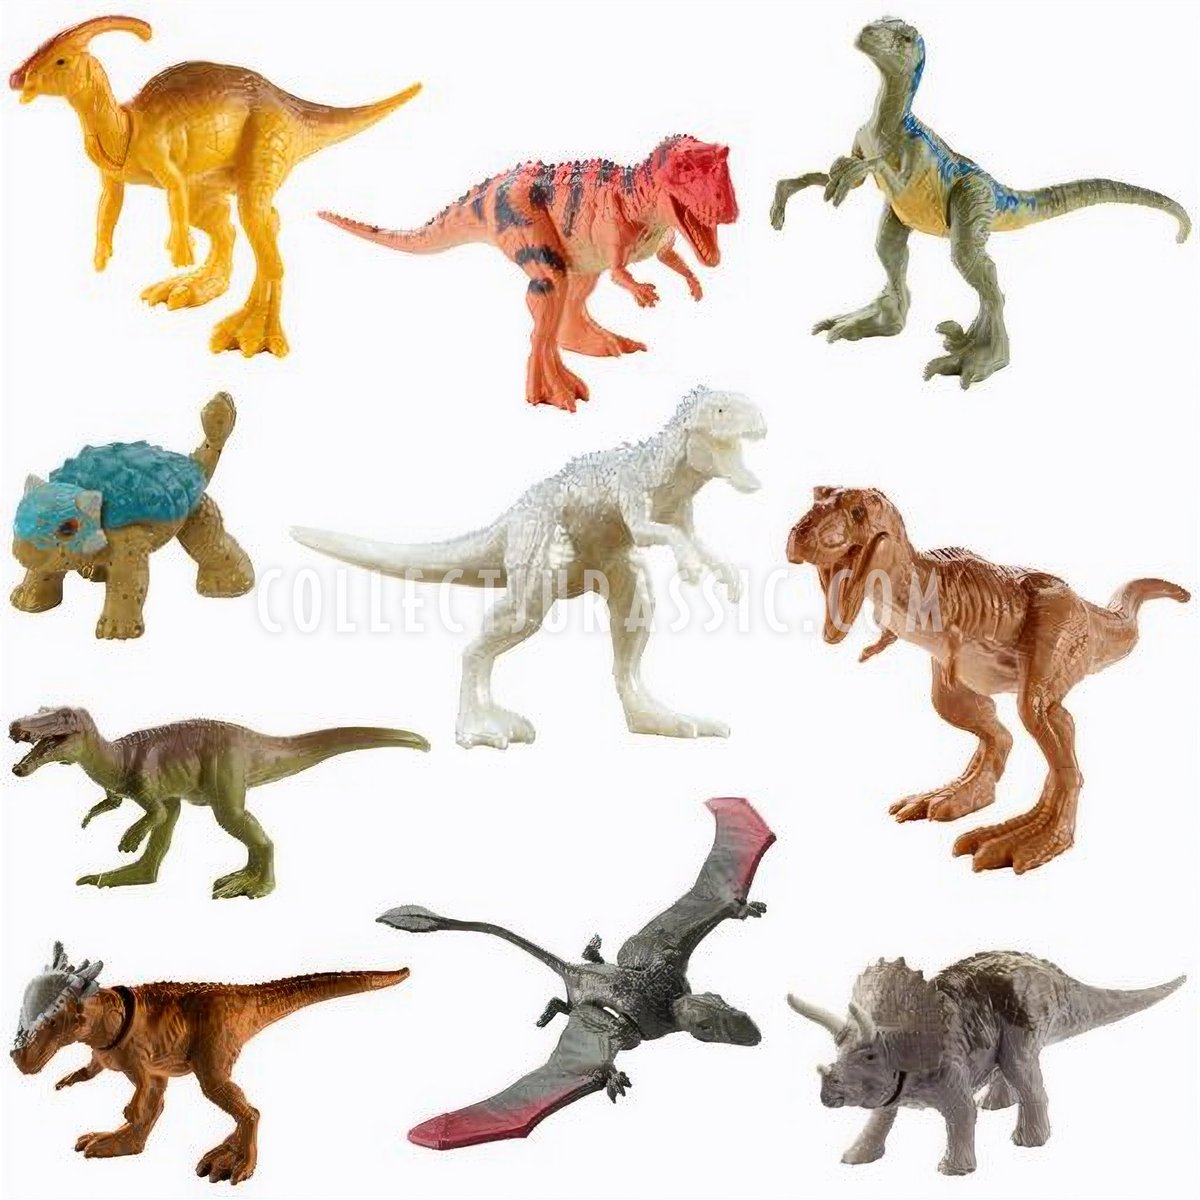 Collect Jurassic Camp Cretaceous Mini Dinos We Ve Got A All New Image Showcasing An Upcoming Mattel Mino Dino Wave Most Likely Hitting Fall To Coincide With Netflix S Jurassic World Camp